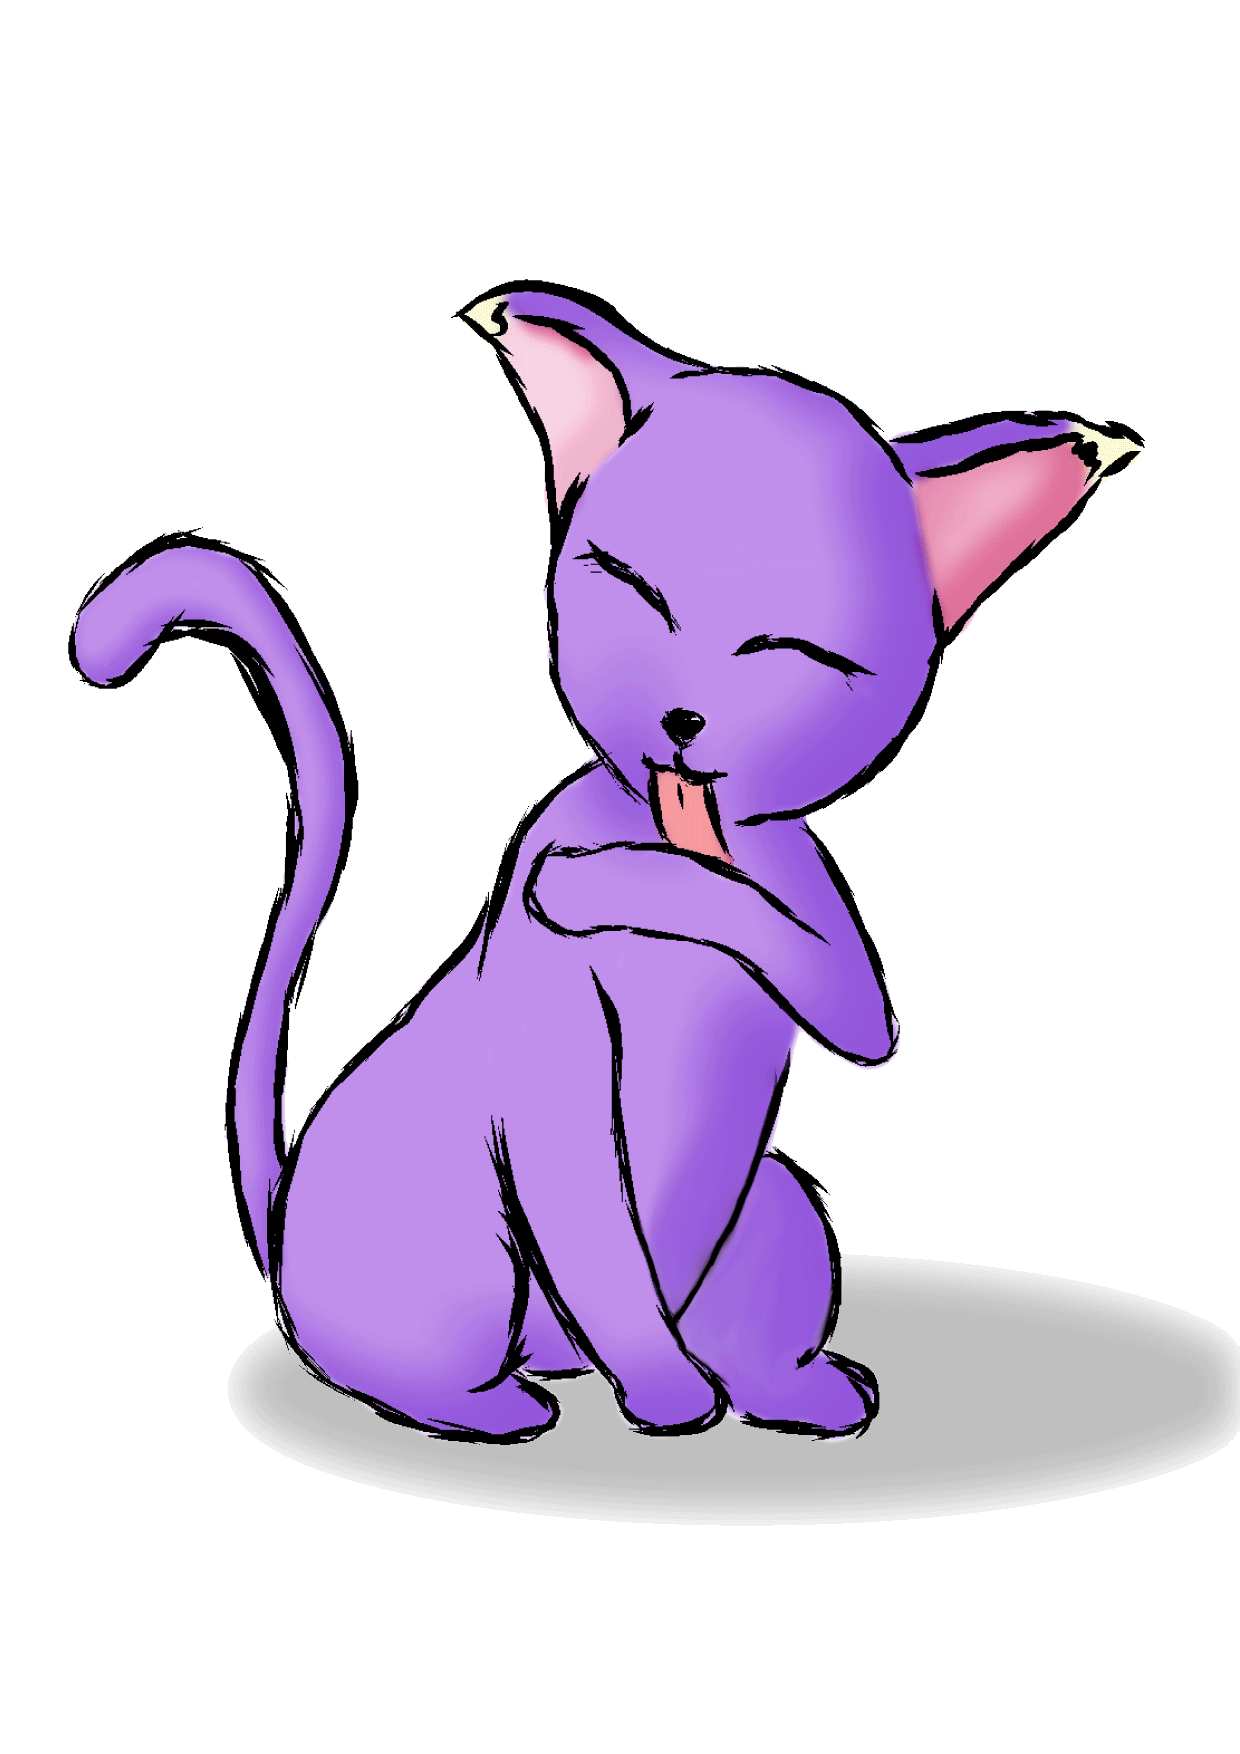 Cat Animated Pictures